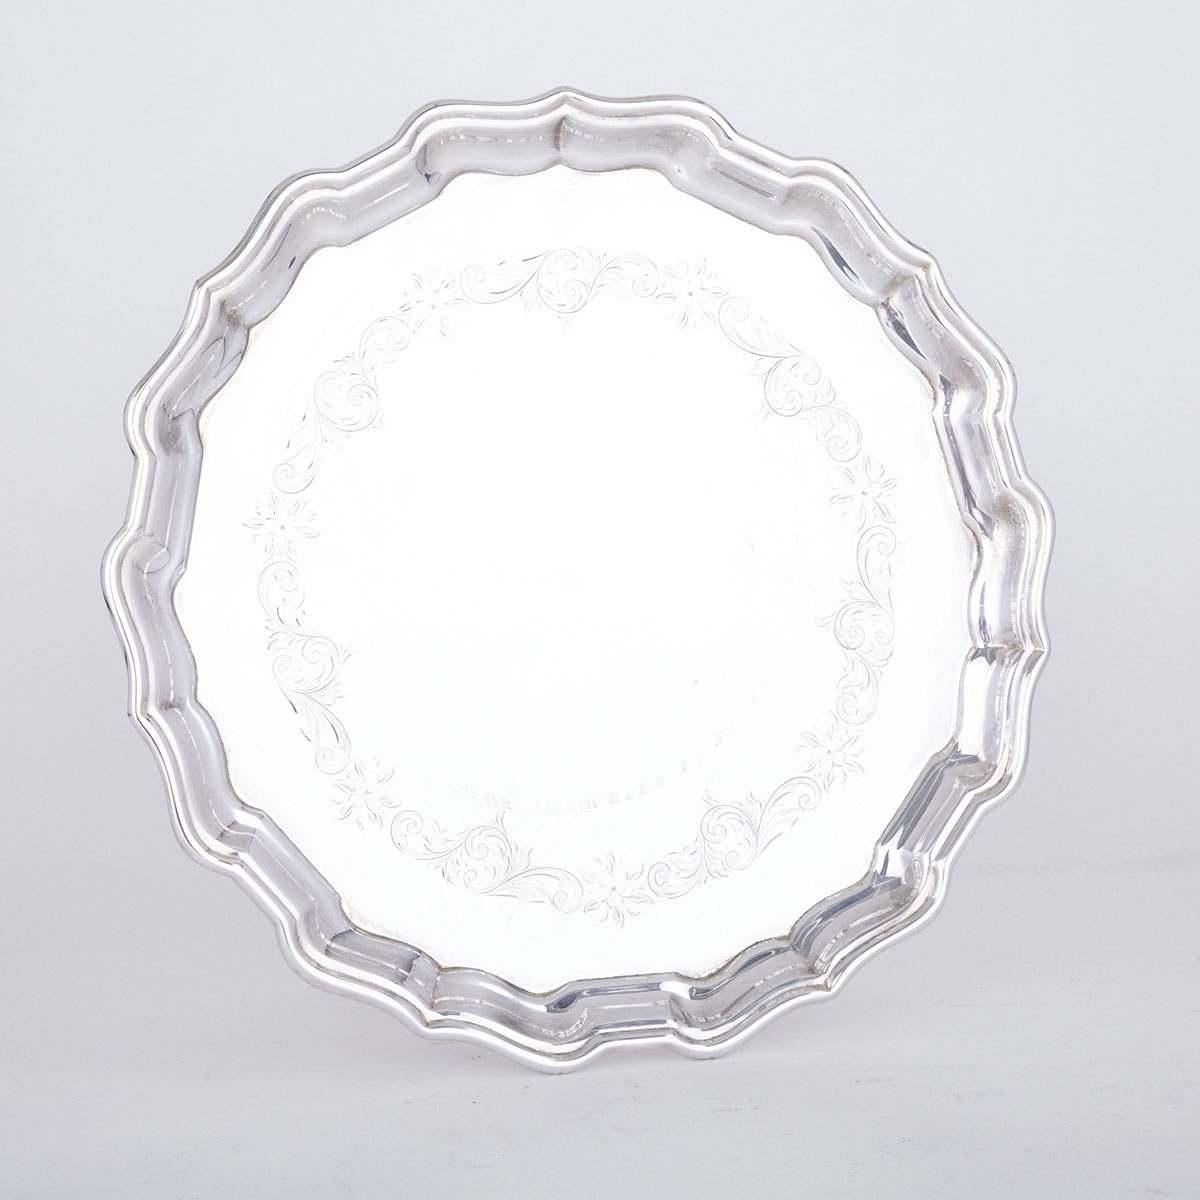 Canadian Silver Shaped Circular Salver, Henry Birks & Sons, Montreal, Que., 1962